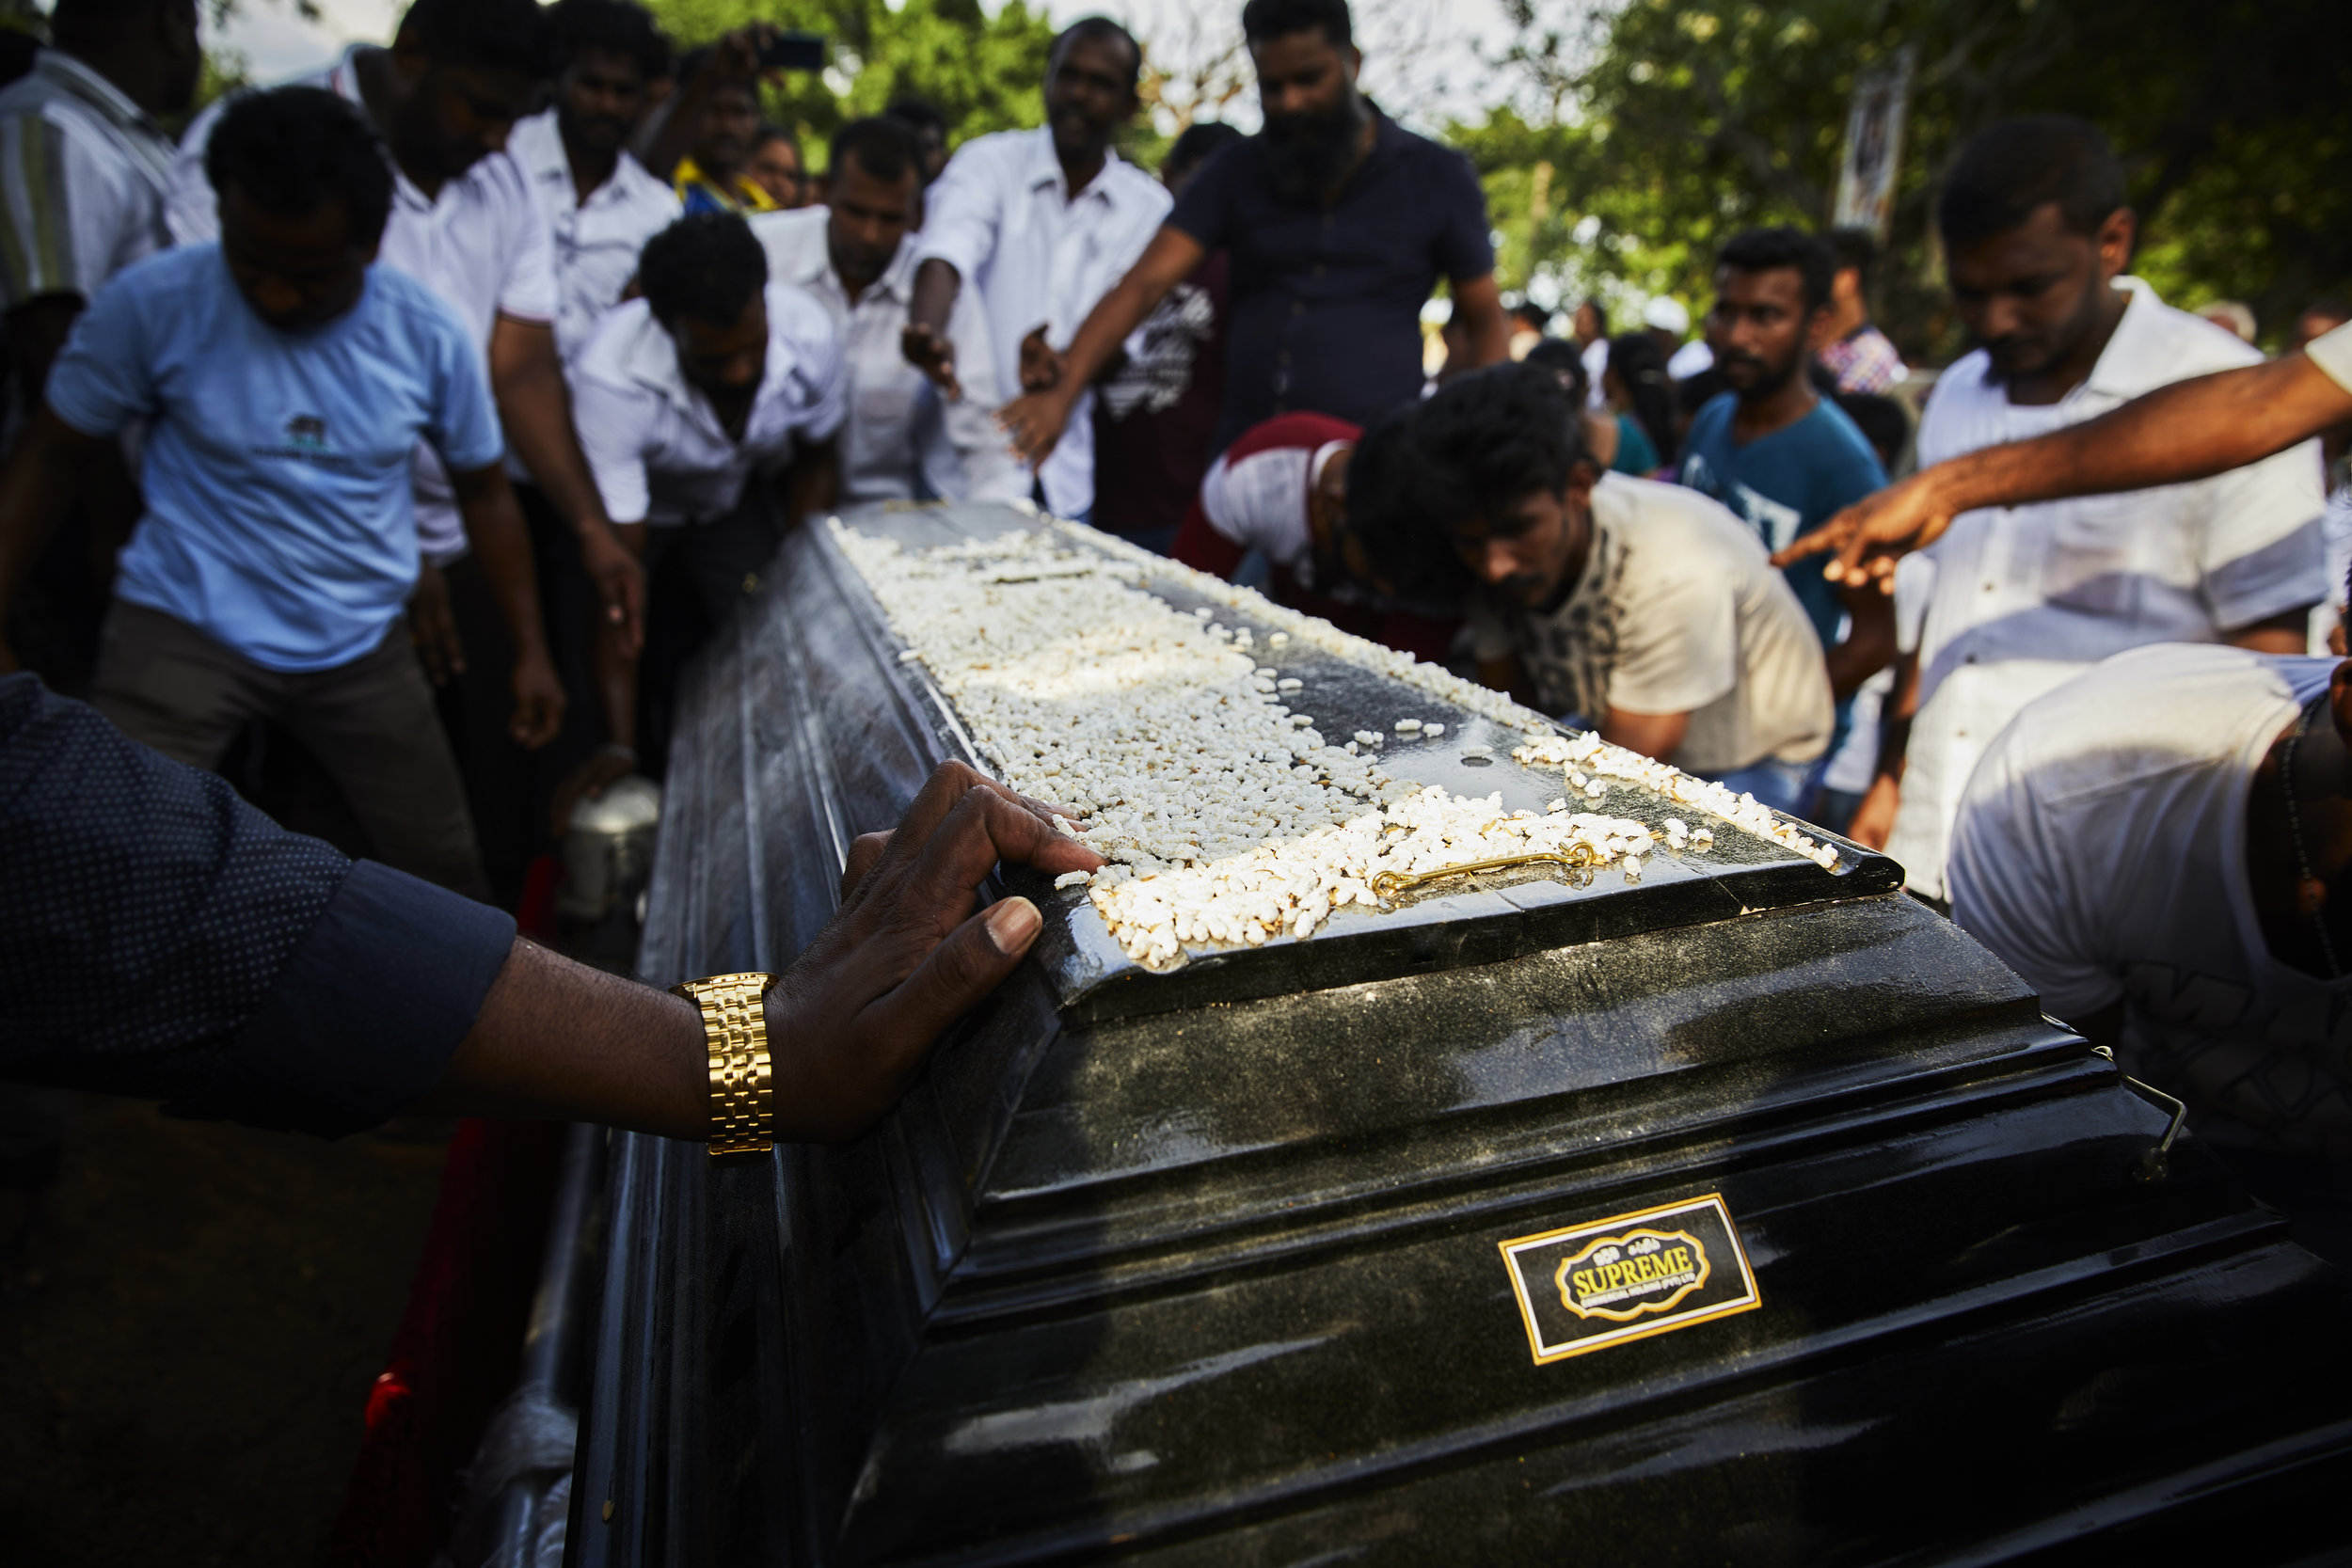  Family and Friends carry the casket of deceased, Loganathan Ramesh, 31 yrs old, who died on April 21, 2019 in the St.Anthony's Bomb explosion on easter Sunday. They will take the casket to his local church for blessings and then on to the cemetary f